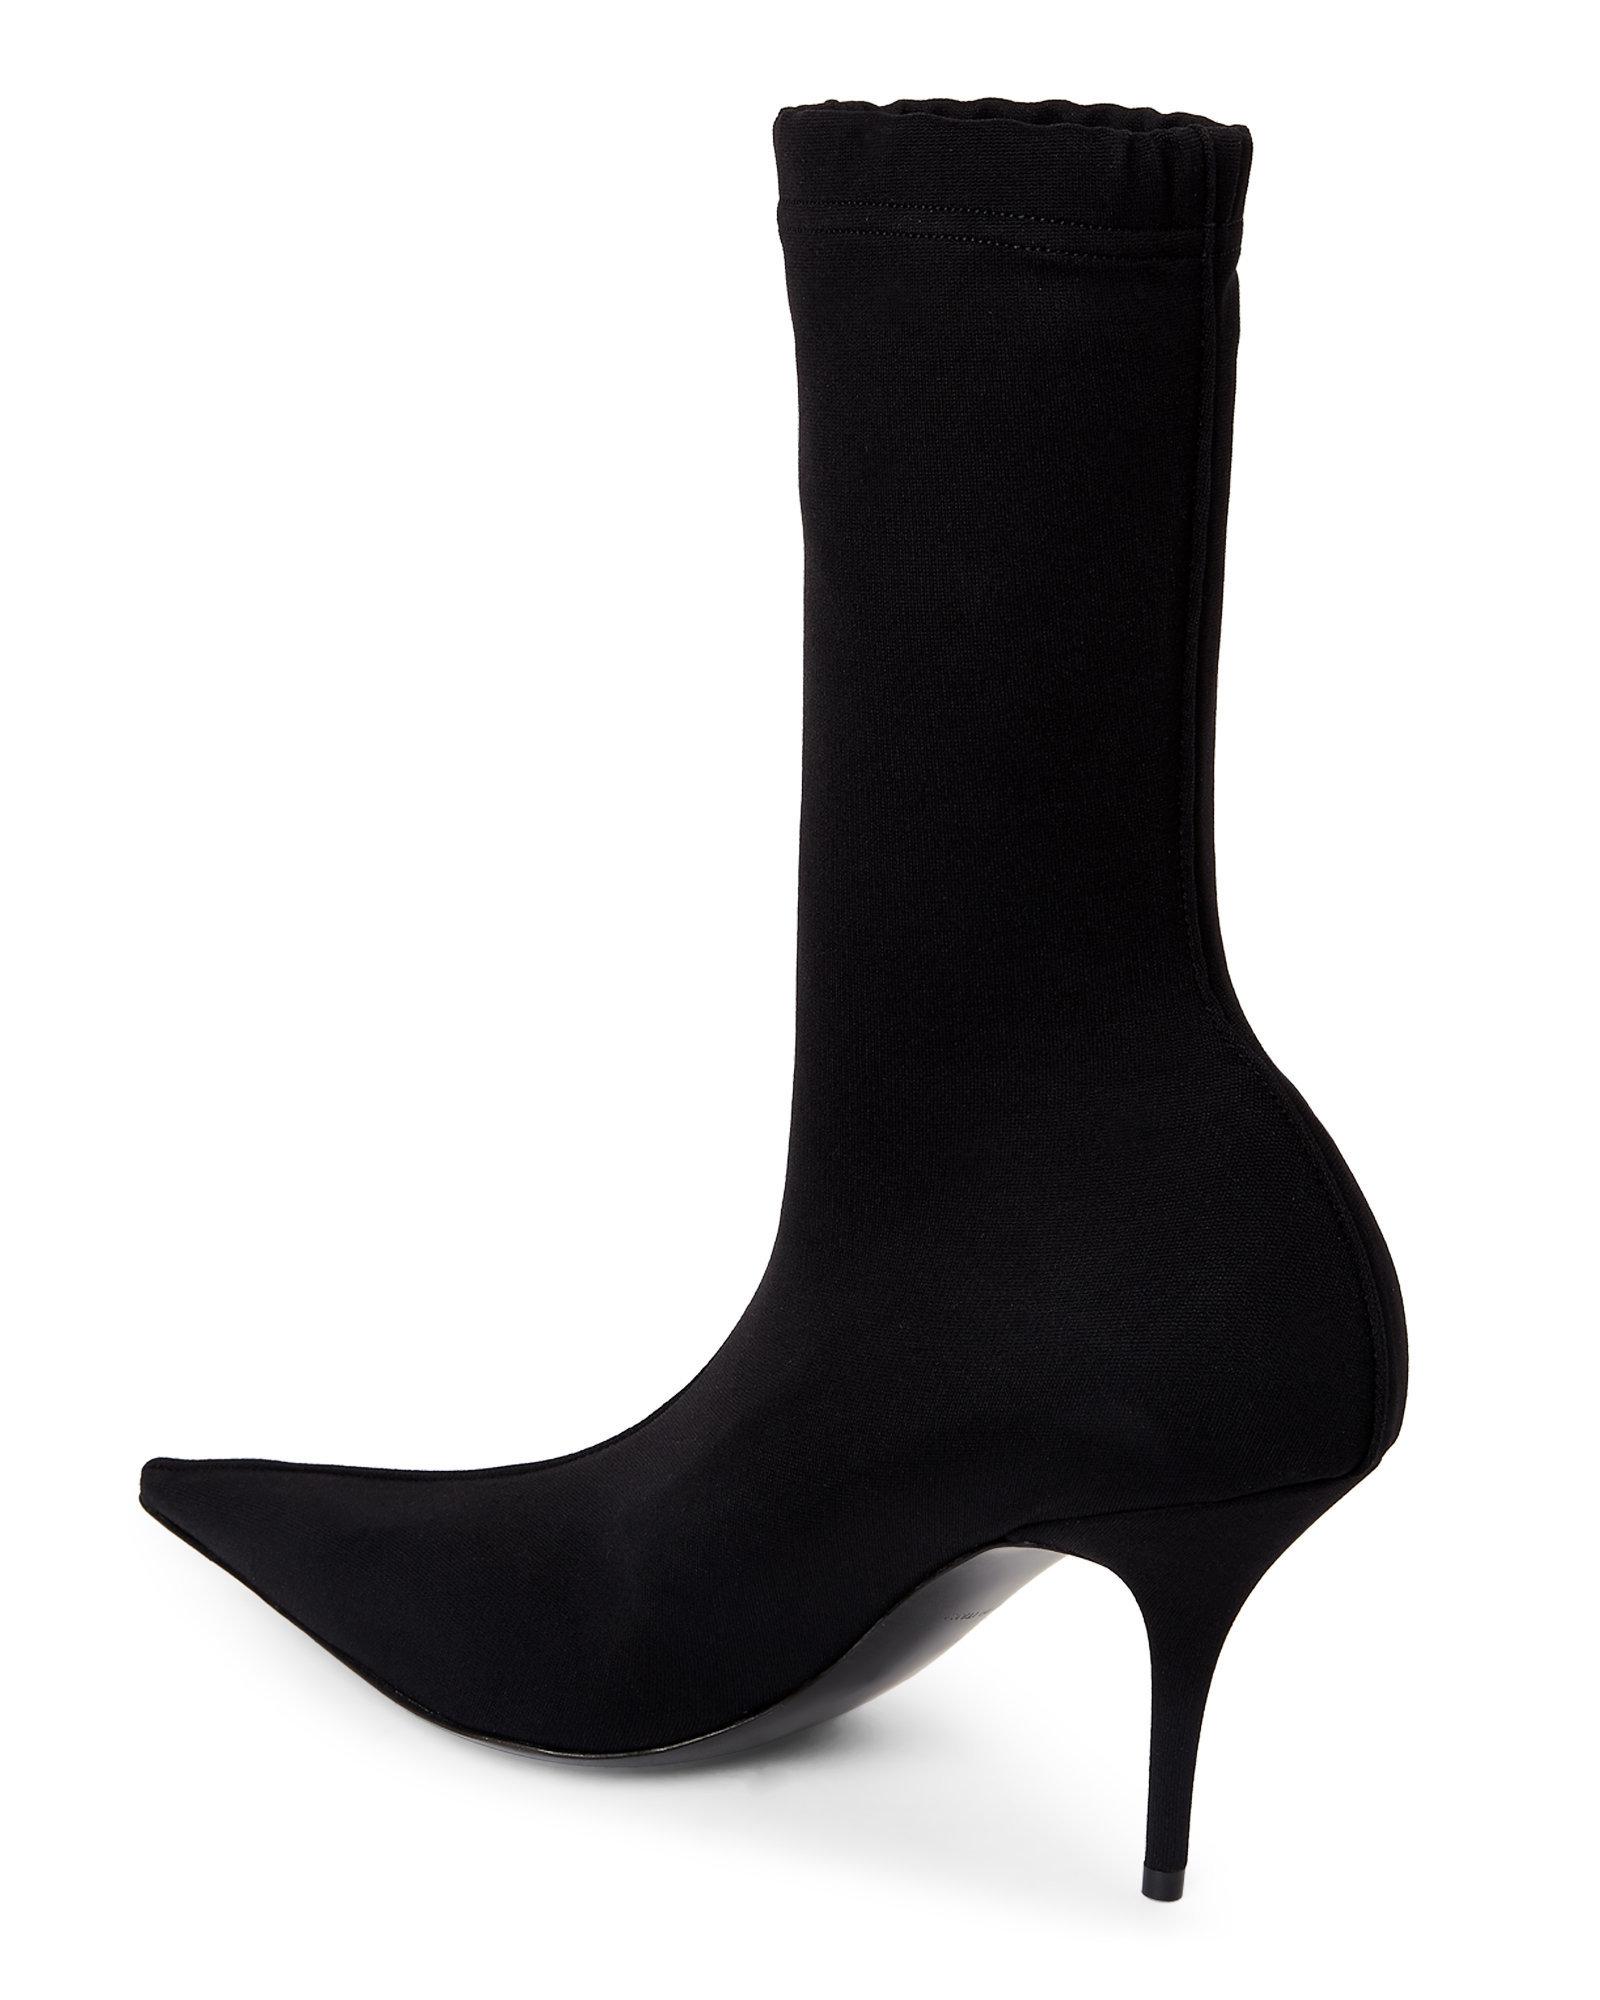 Balenciaga Leather Knife Stretch Knit Pointed Toe Booties in Black - Lyst